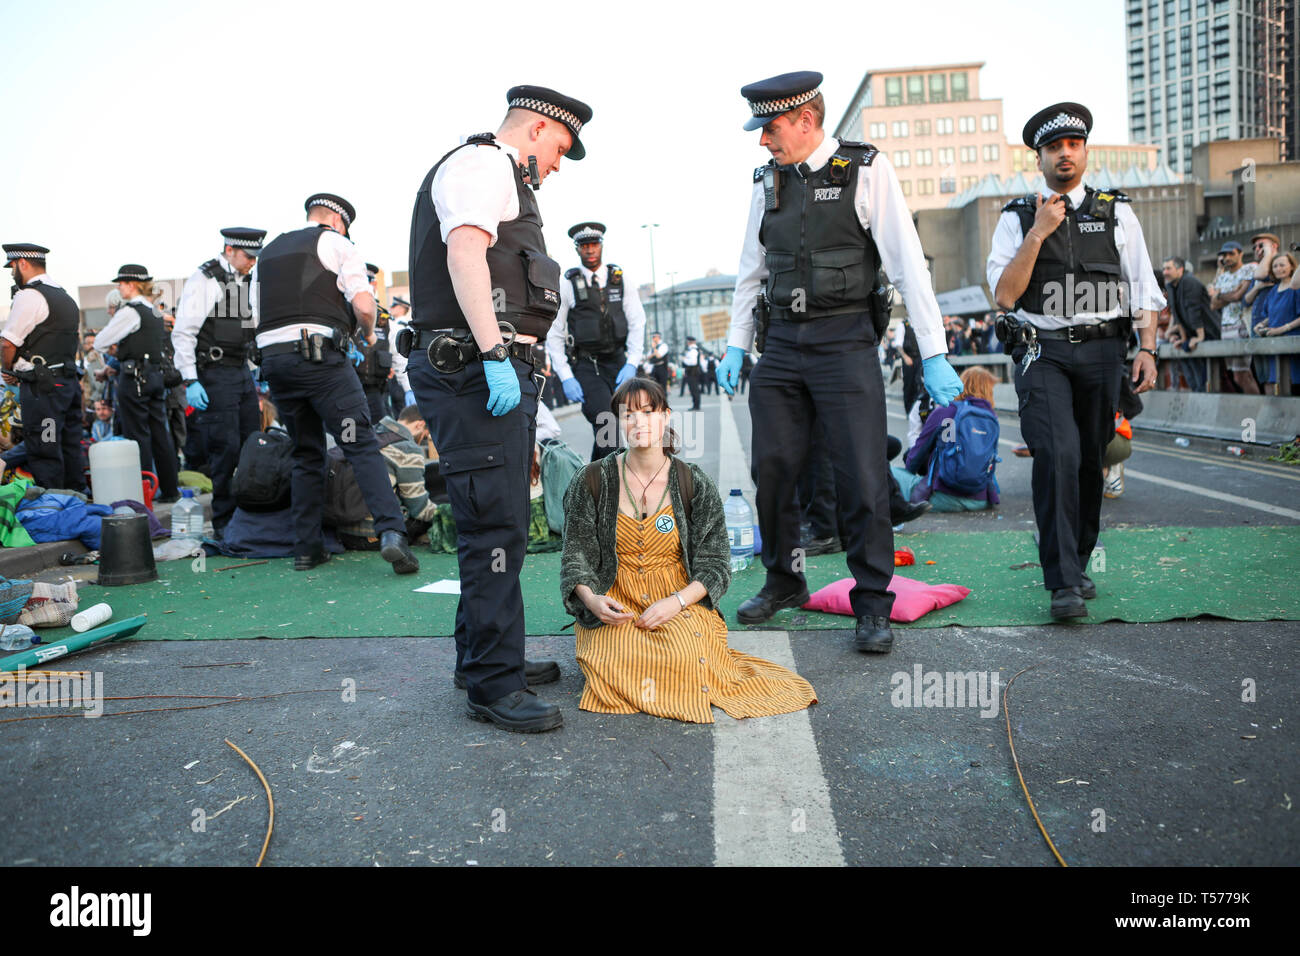 London, UK. 21st Apr 2019.  A massive police operation with mass arrests of environmental campaign group Extinction Rebellion from Waterloo Bridge. Credit: Penelope Barritt/Alamy Live News Stock Photo